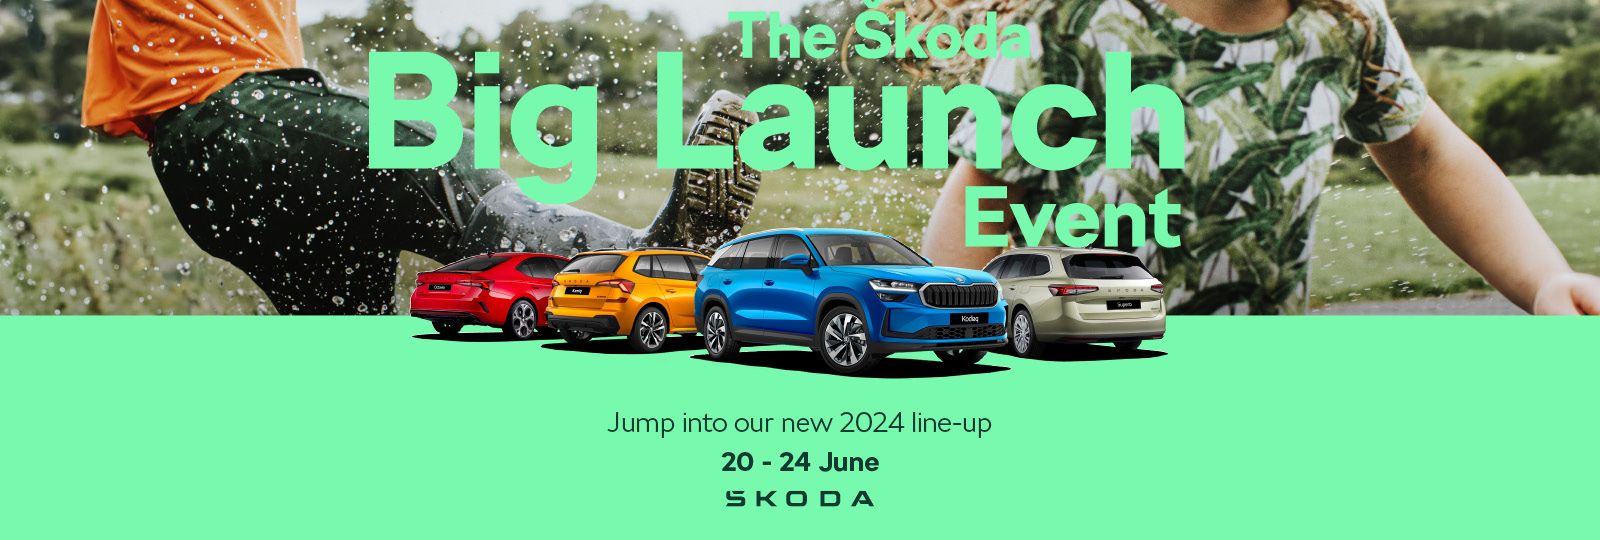 Skoda May Test Drive Event